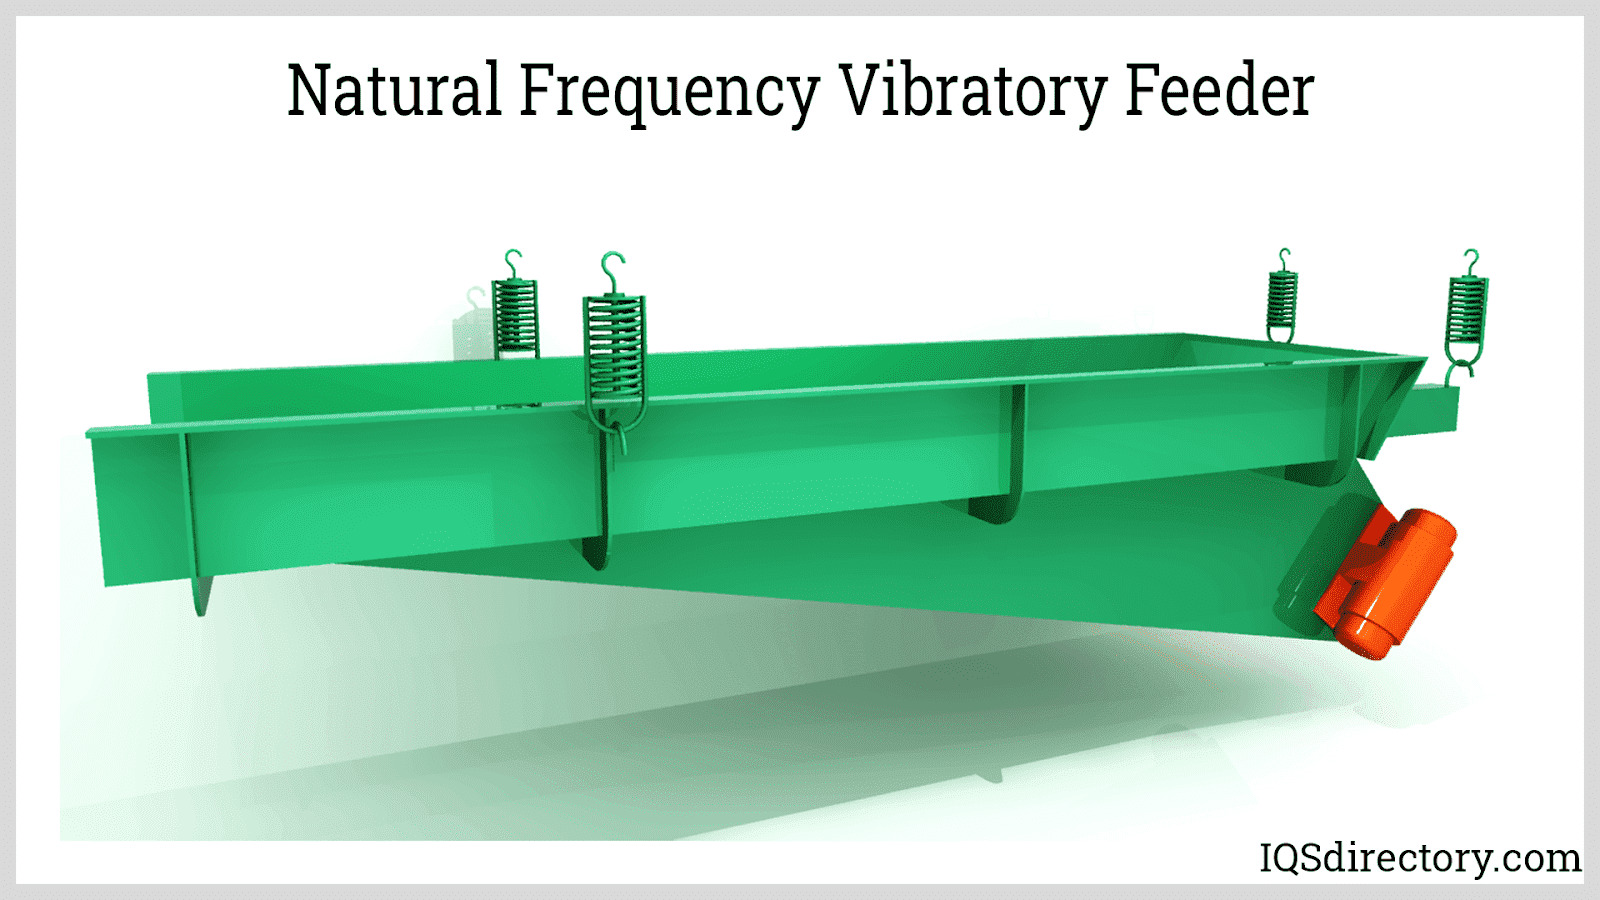 Natural Frequency Vibratory Feeder